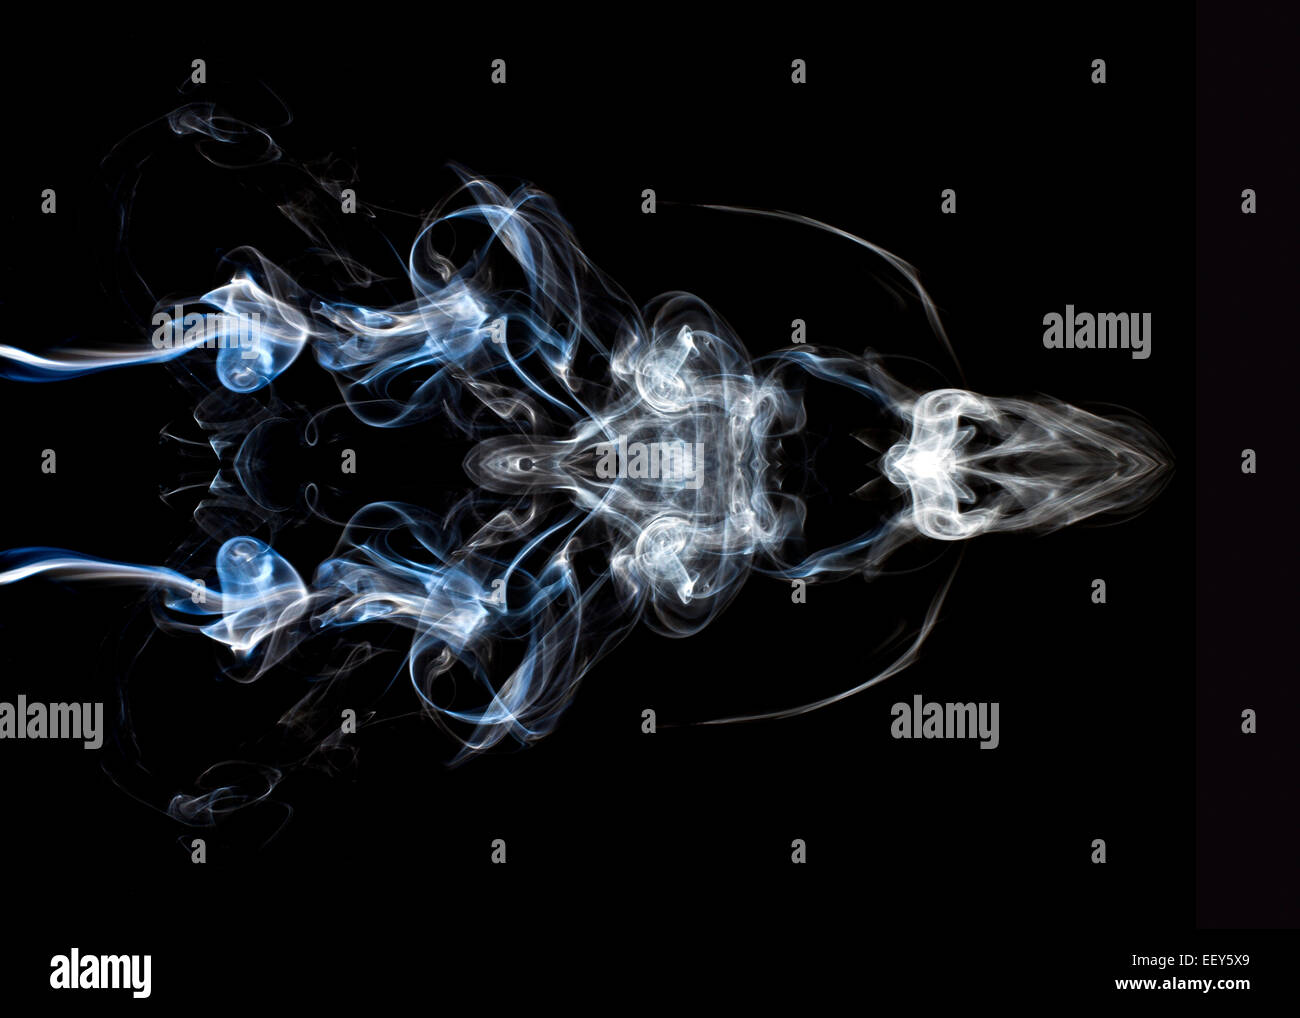 Pictorial images of smoke Stock Photo